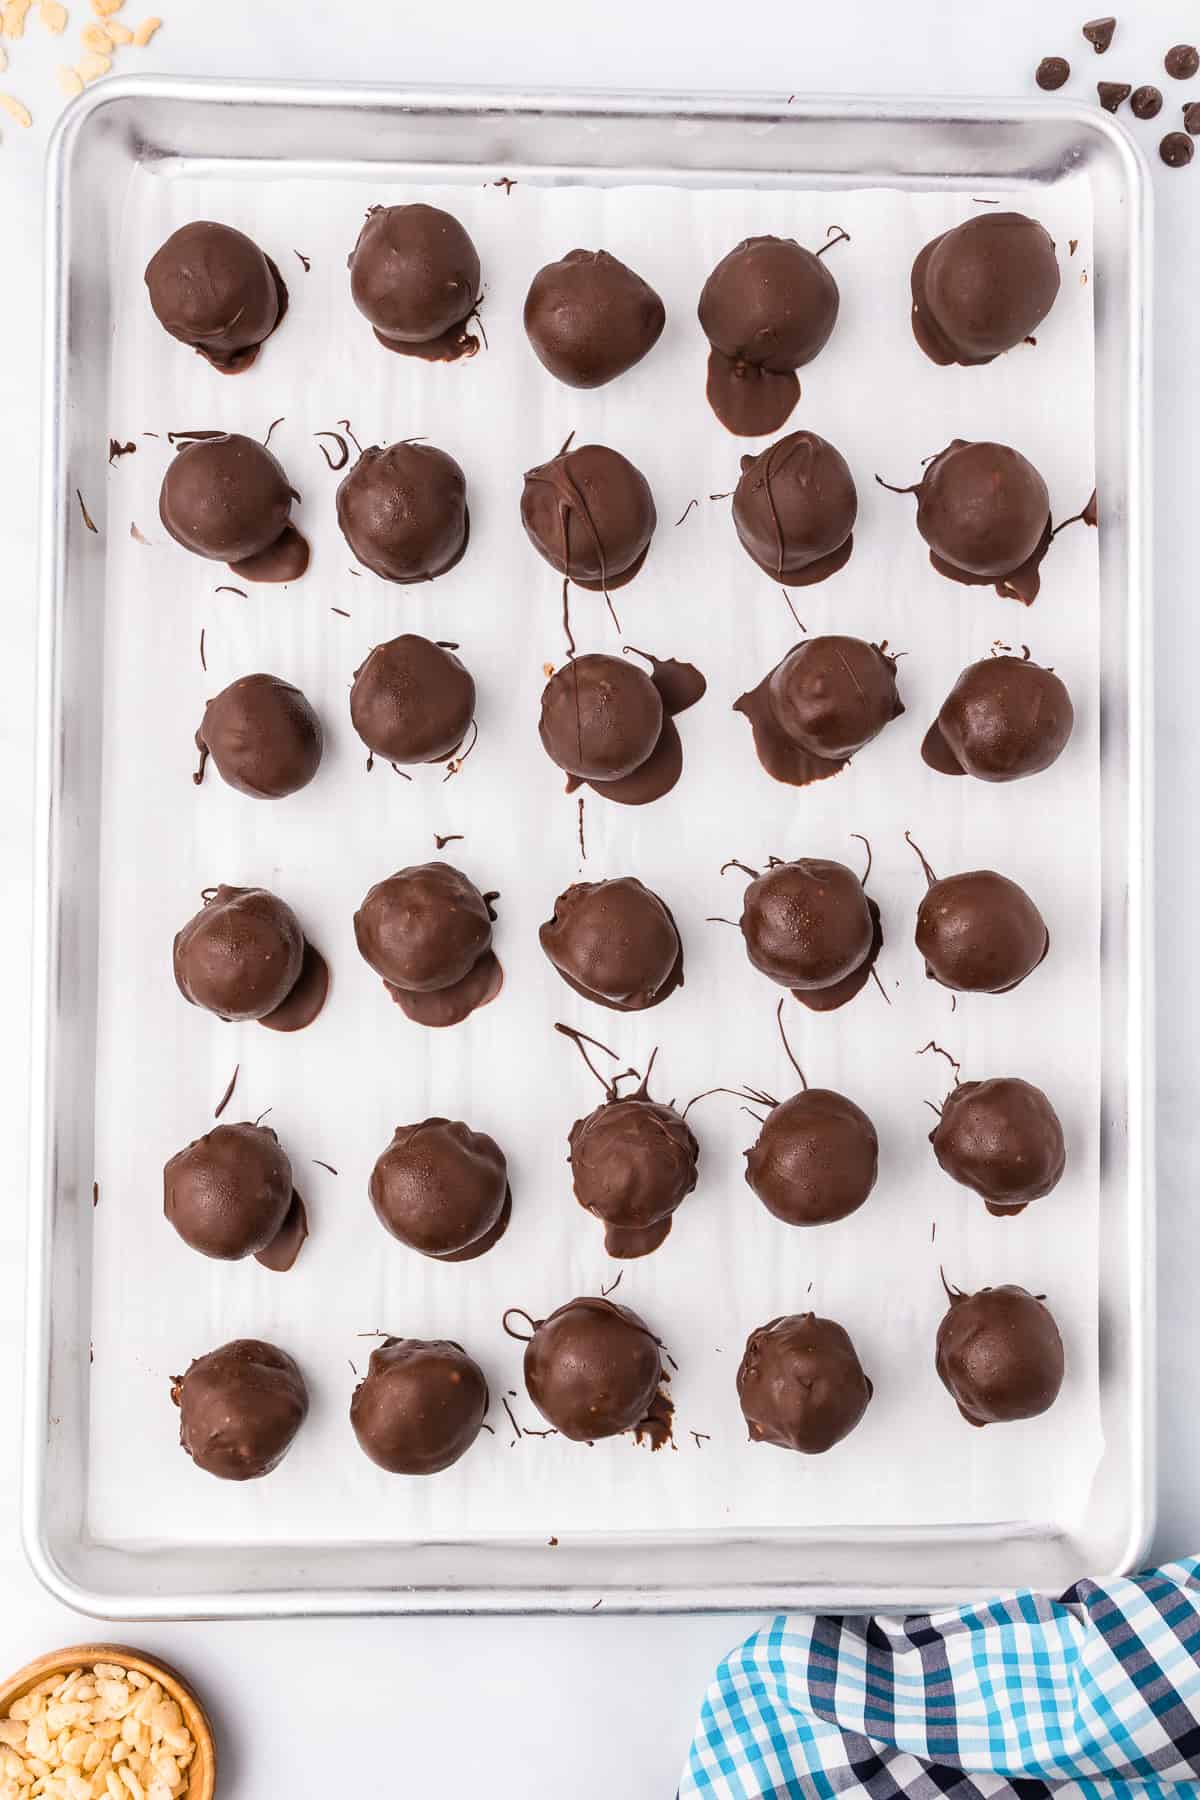 Peanut butter rice krispie balls dipped in chocolate spaced on pan lined with parchment paper from overhead on a counter.